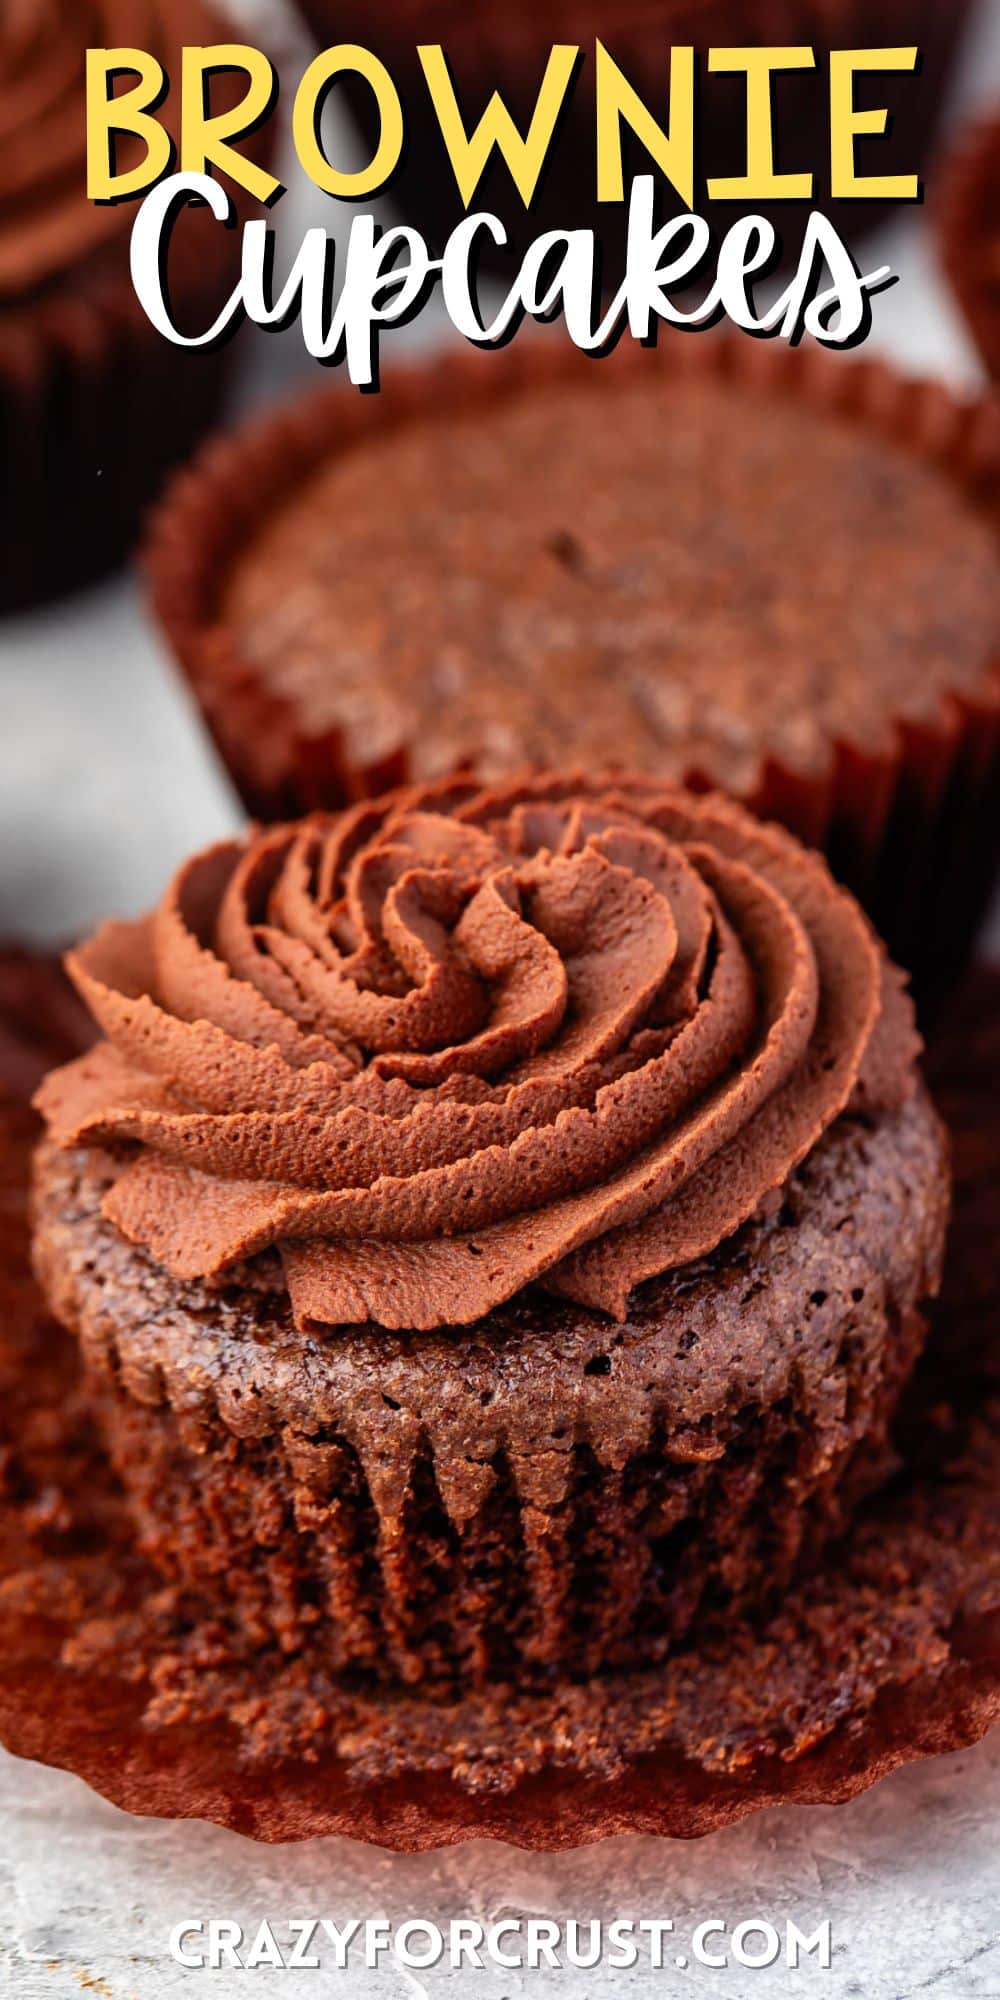 brownie cupcake with brown frosting with words on the image.